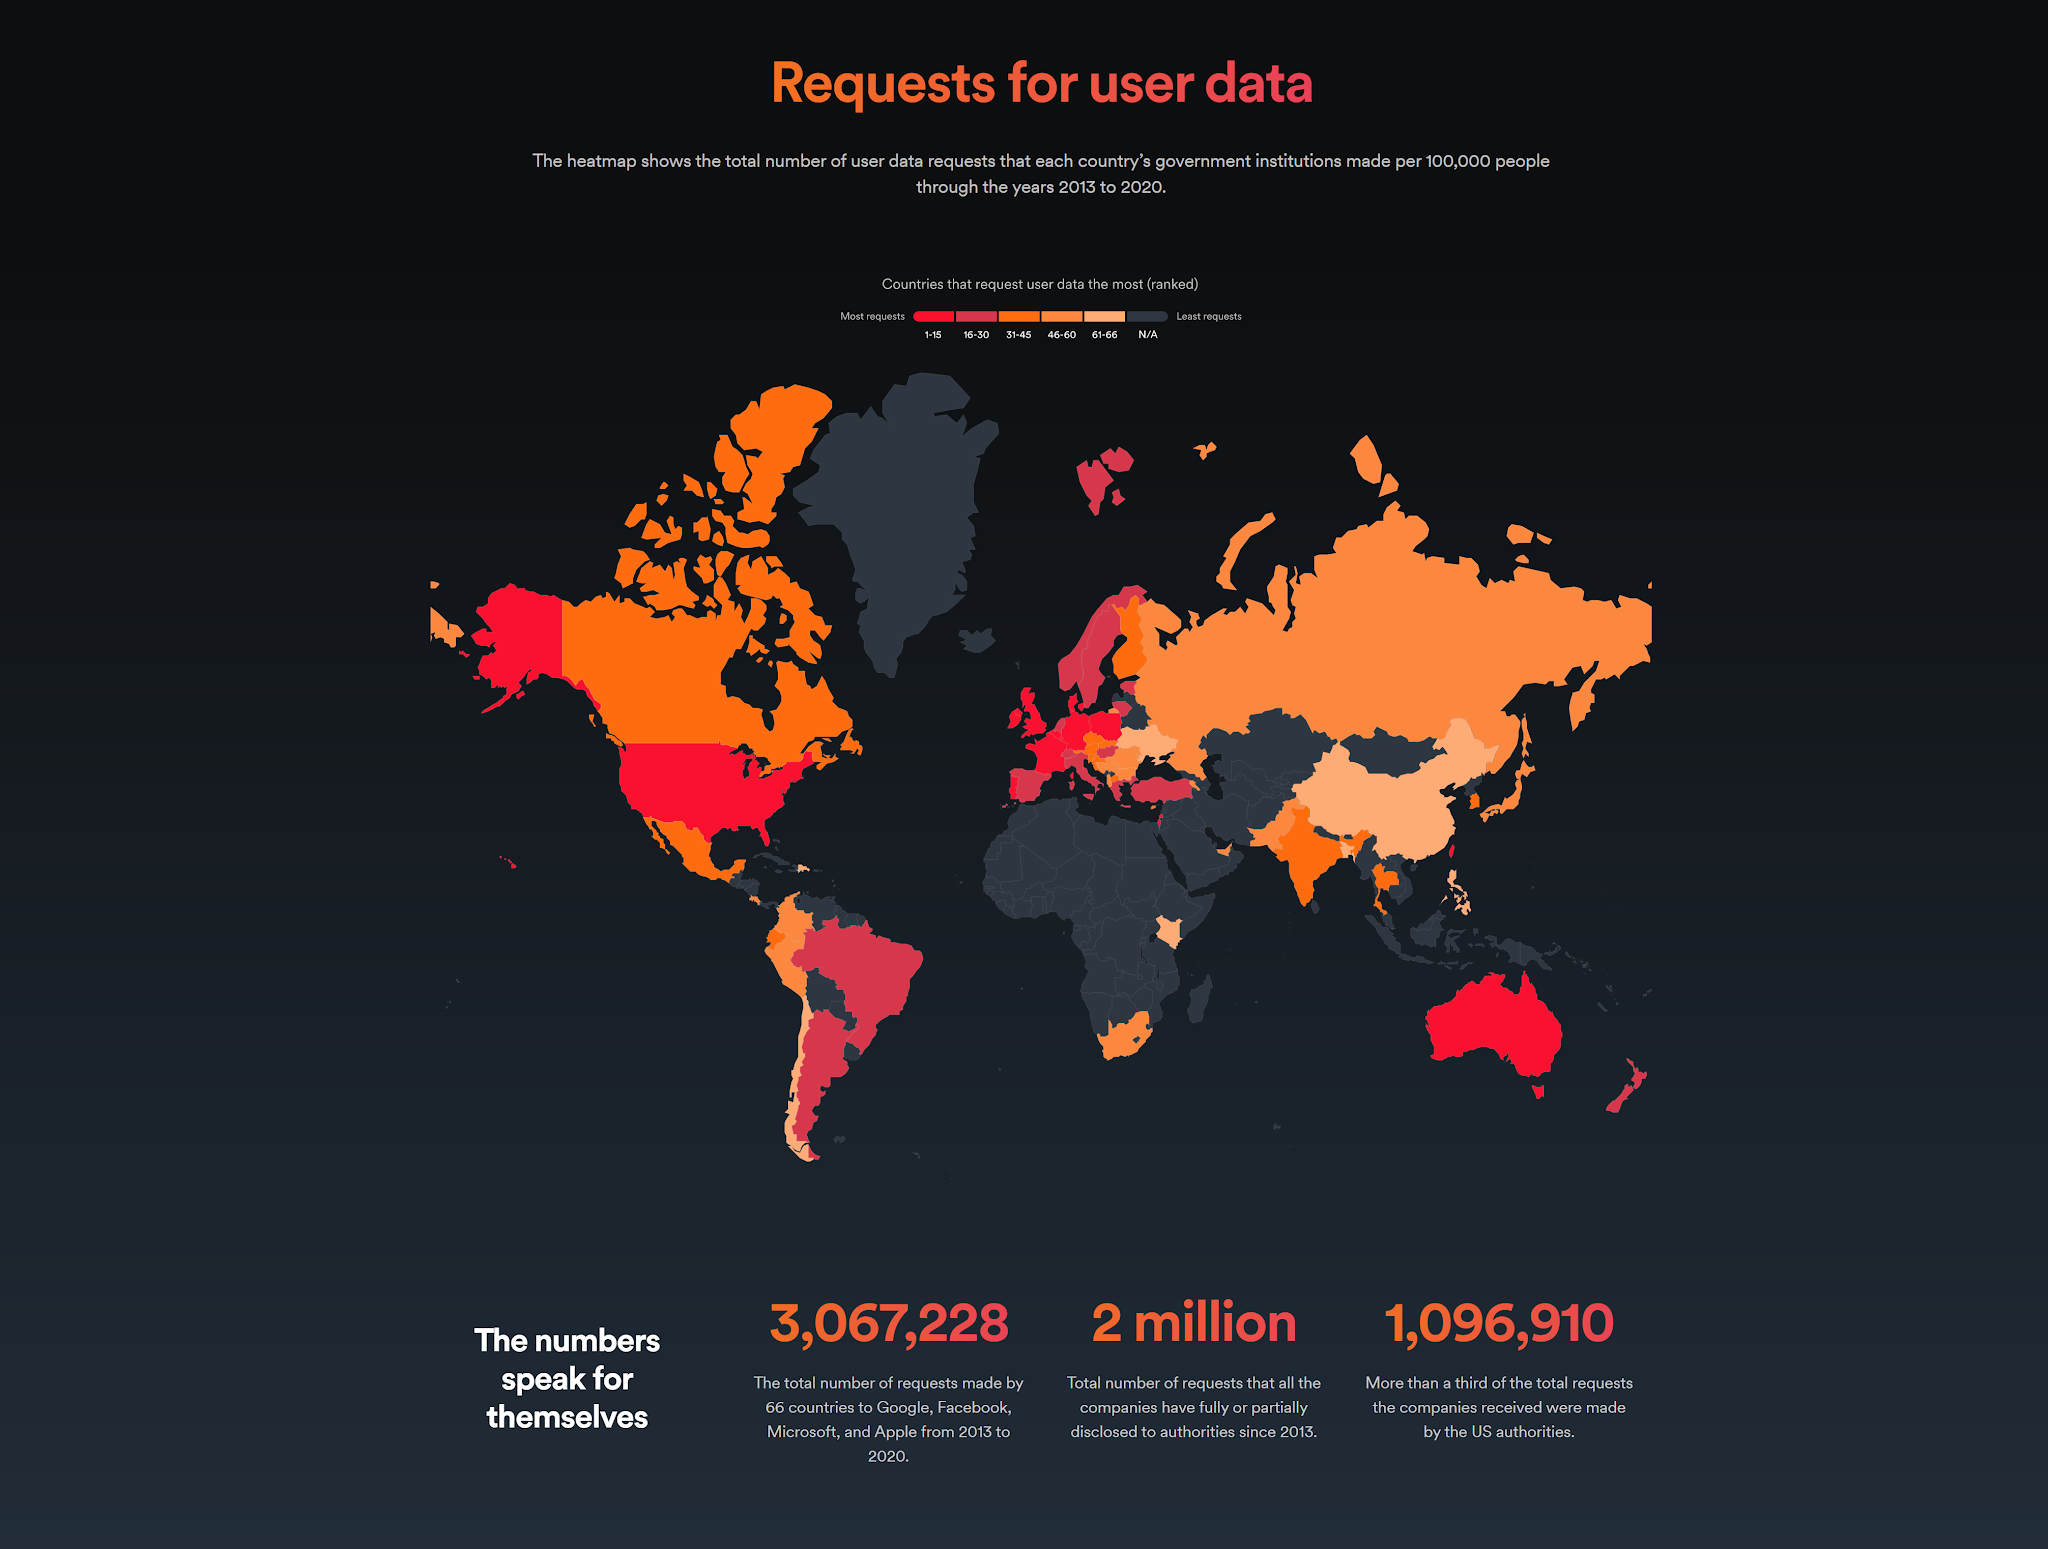 Requests for user data around the world (map)